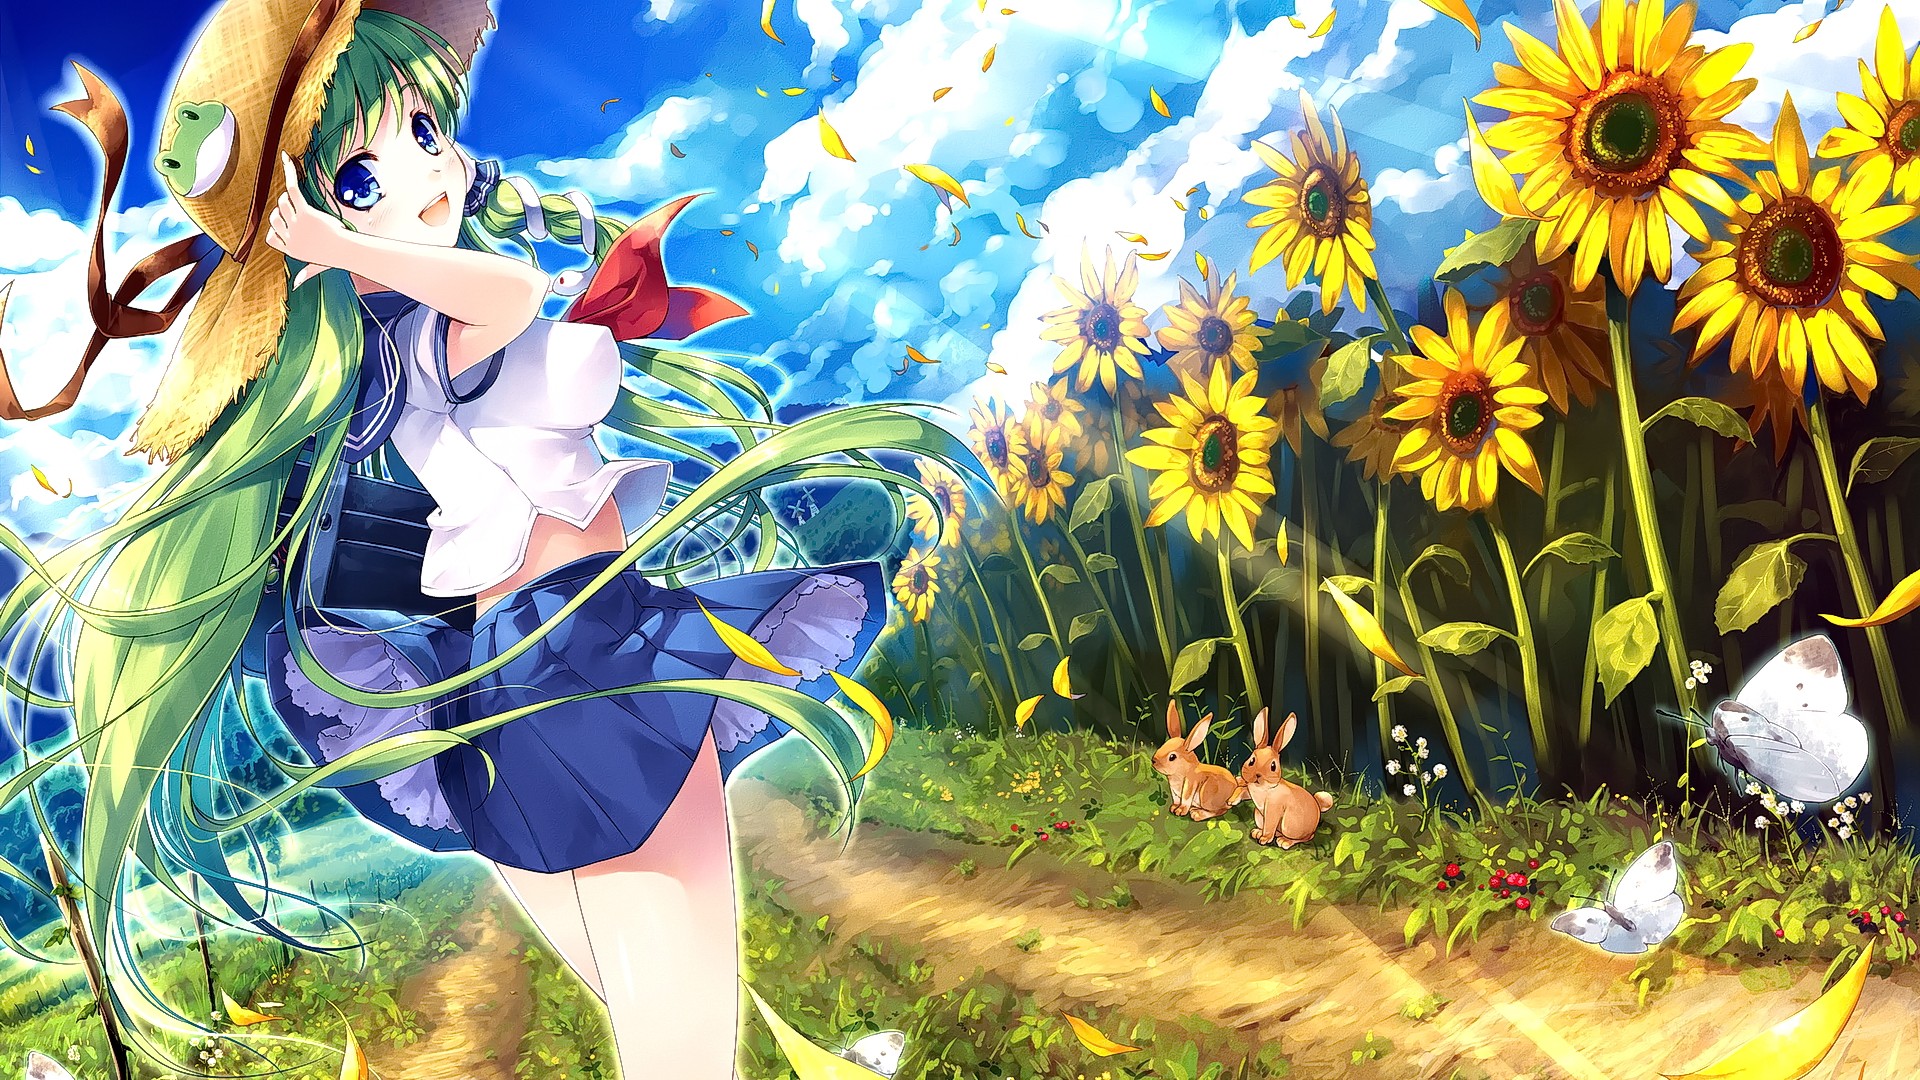 Anime 1920x1080 anime anime girls open mouth green hair hat blue eyes smiling sunflowers butterfly plants flowers yellow flowers women with hats women outdoors outdoors miniskirt long hair